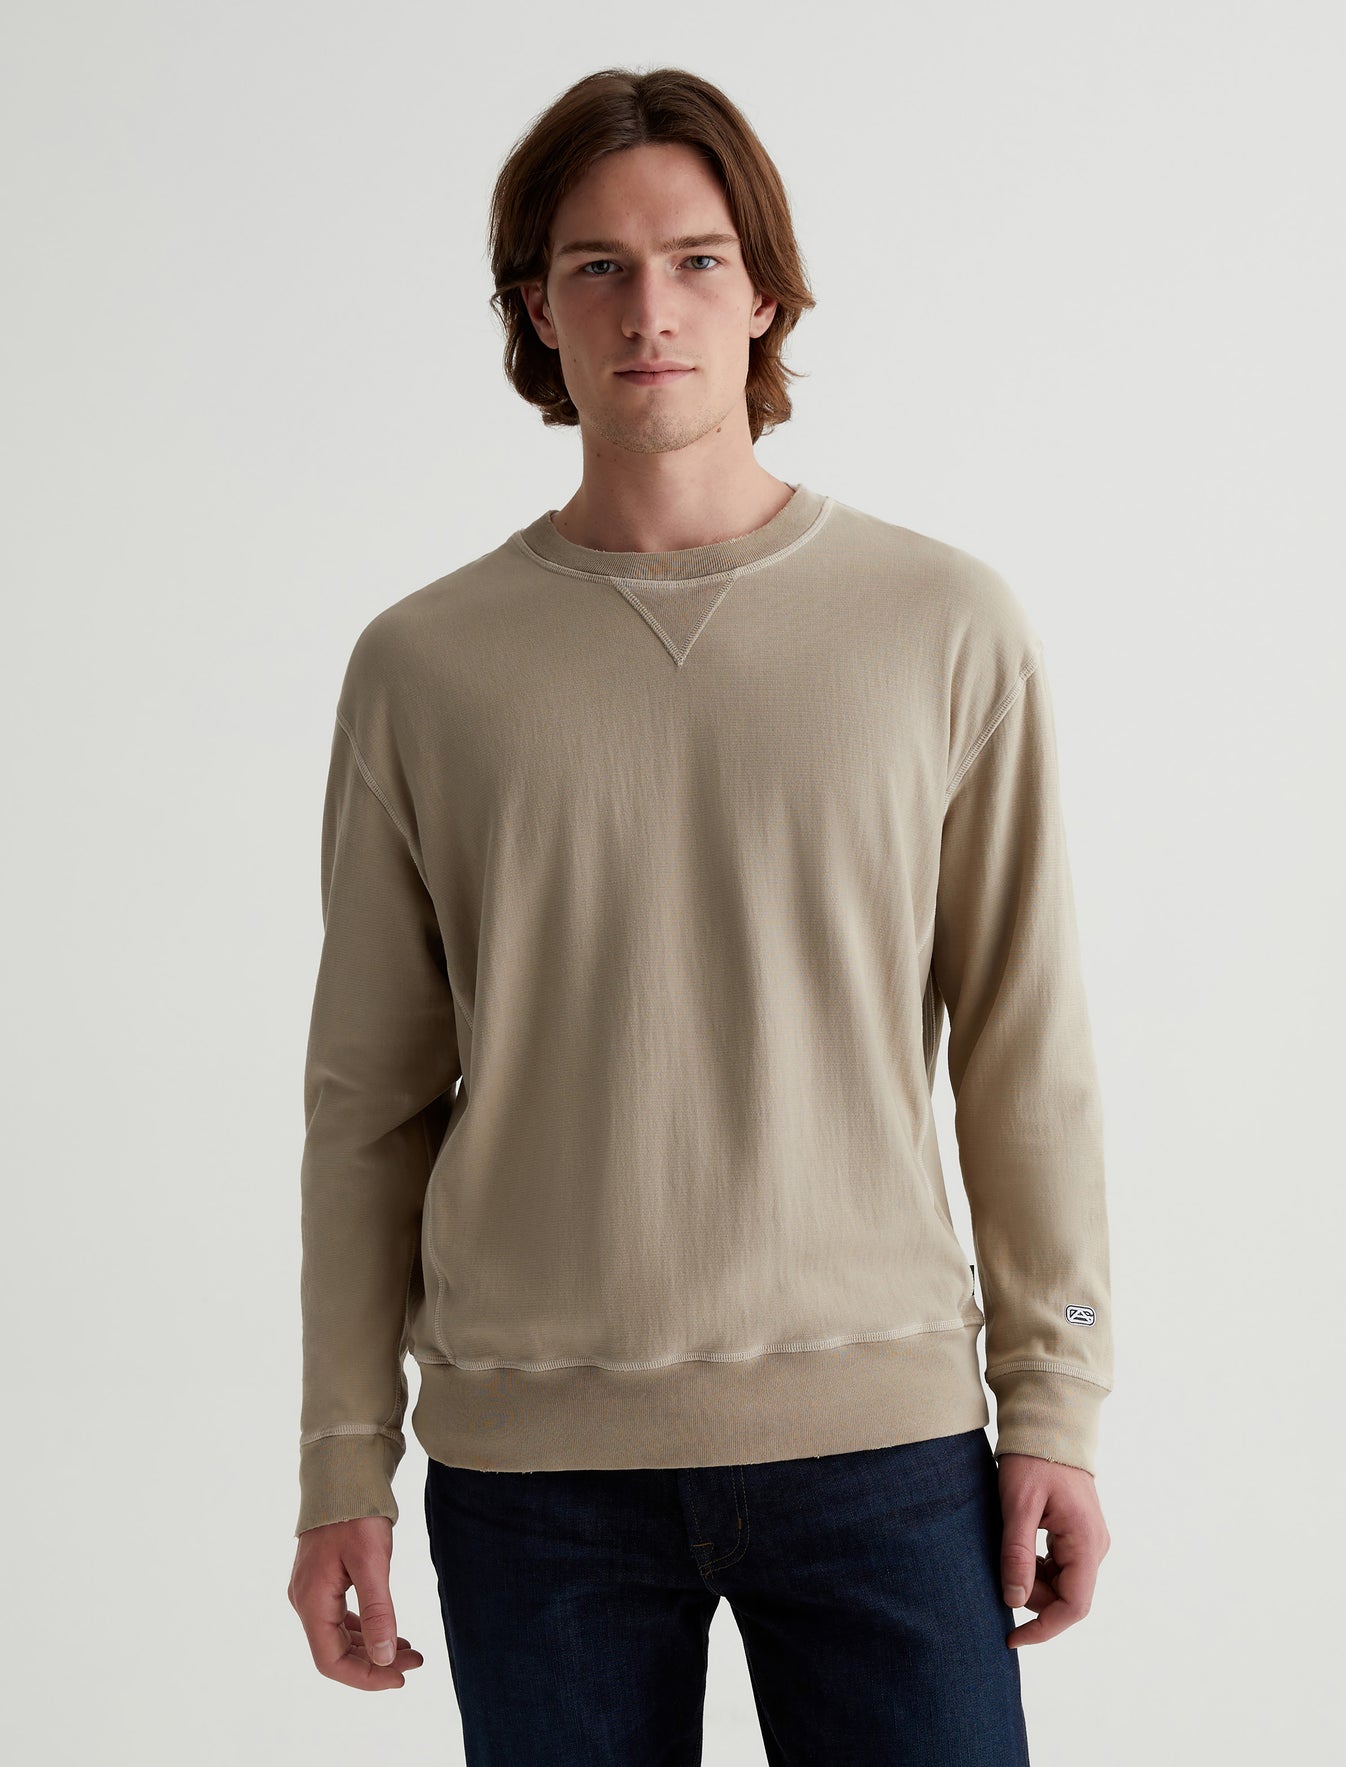 Arc Panelled Sweatshirt 5 Years Light Truffle Relaxed Fit Crew Neck Panelled Mens Top Photo 1